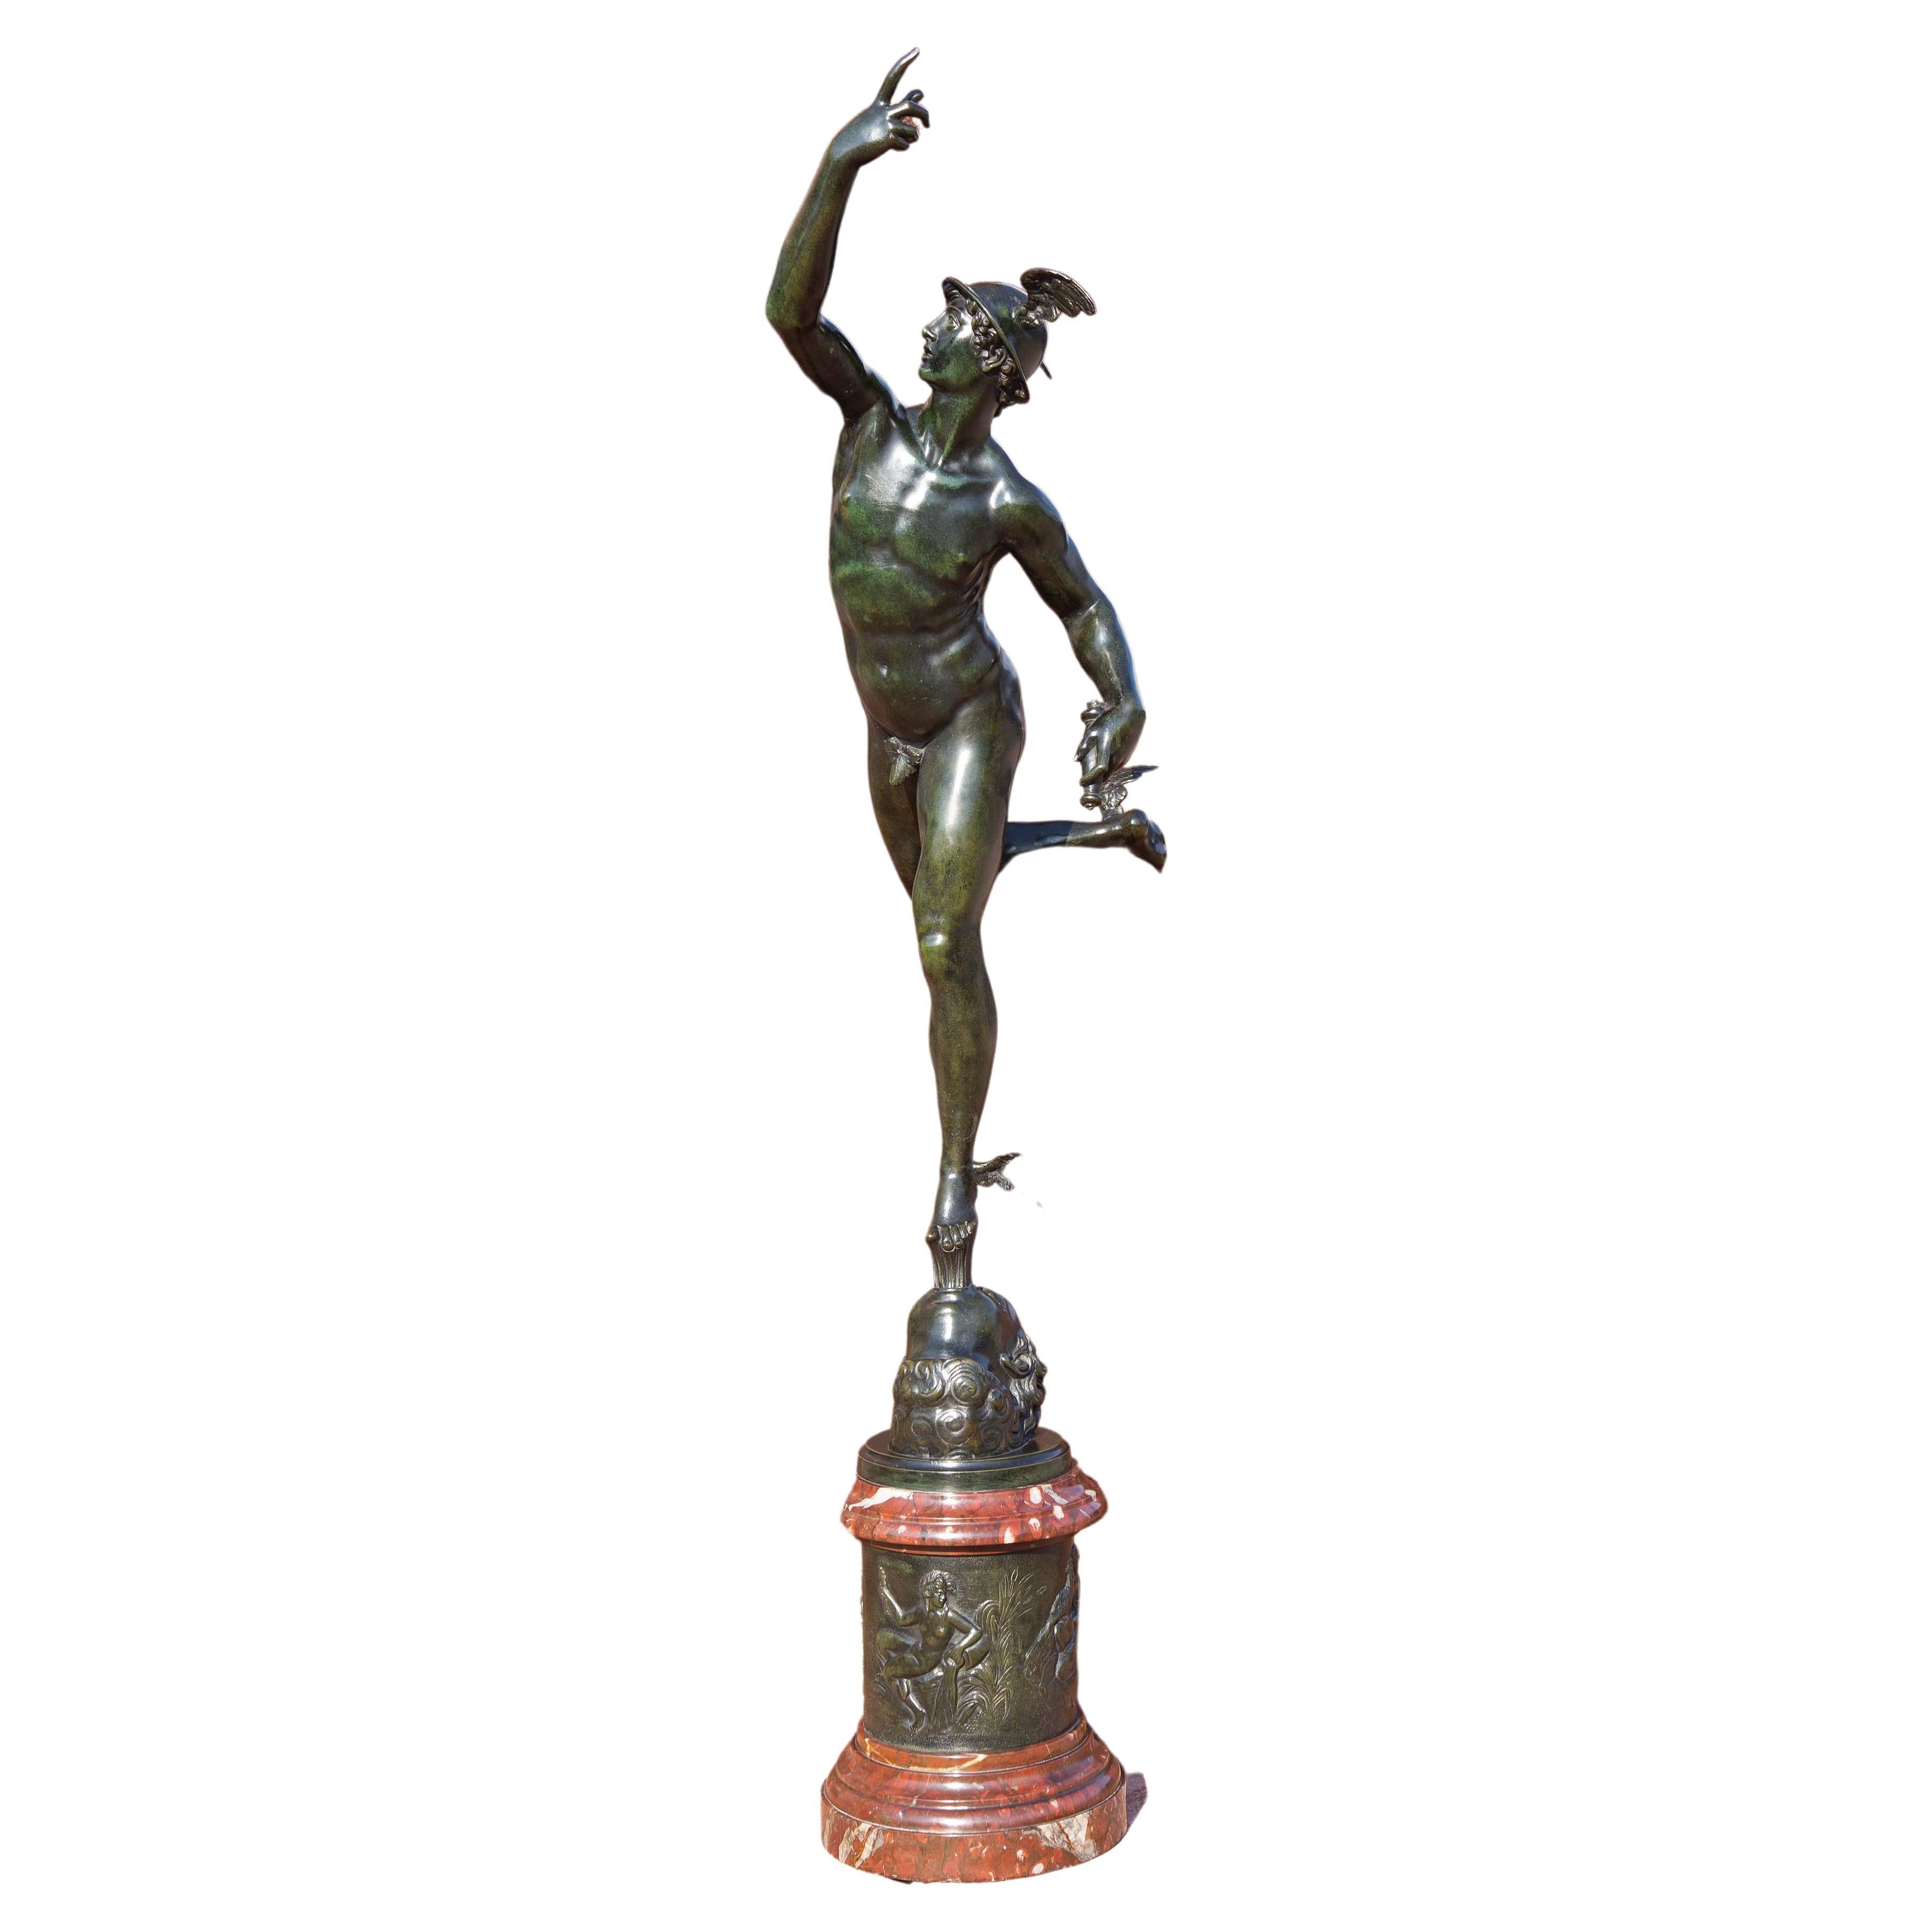 Fine Grand Tour bronze sculpture of mercury flying on the wind after Giambologna. Polished rouge marble and bronze attached base. Green marble pedestal. Inscribed Jean de Bologne ( Giambologna). Over all height 8'7